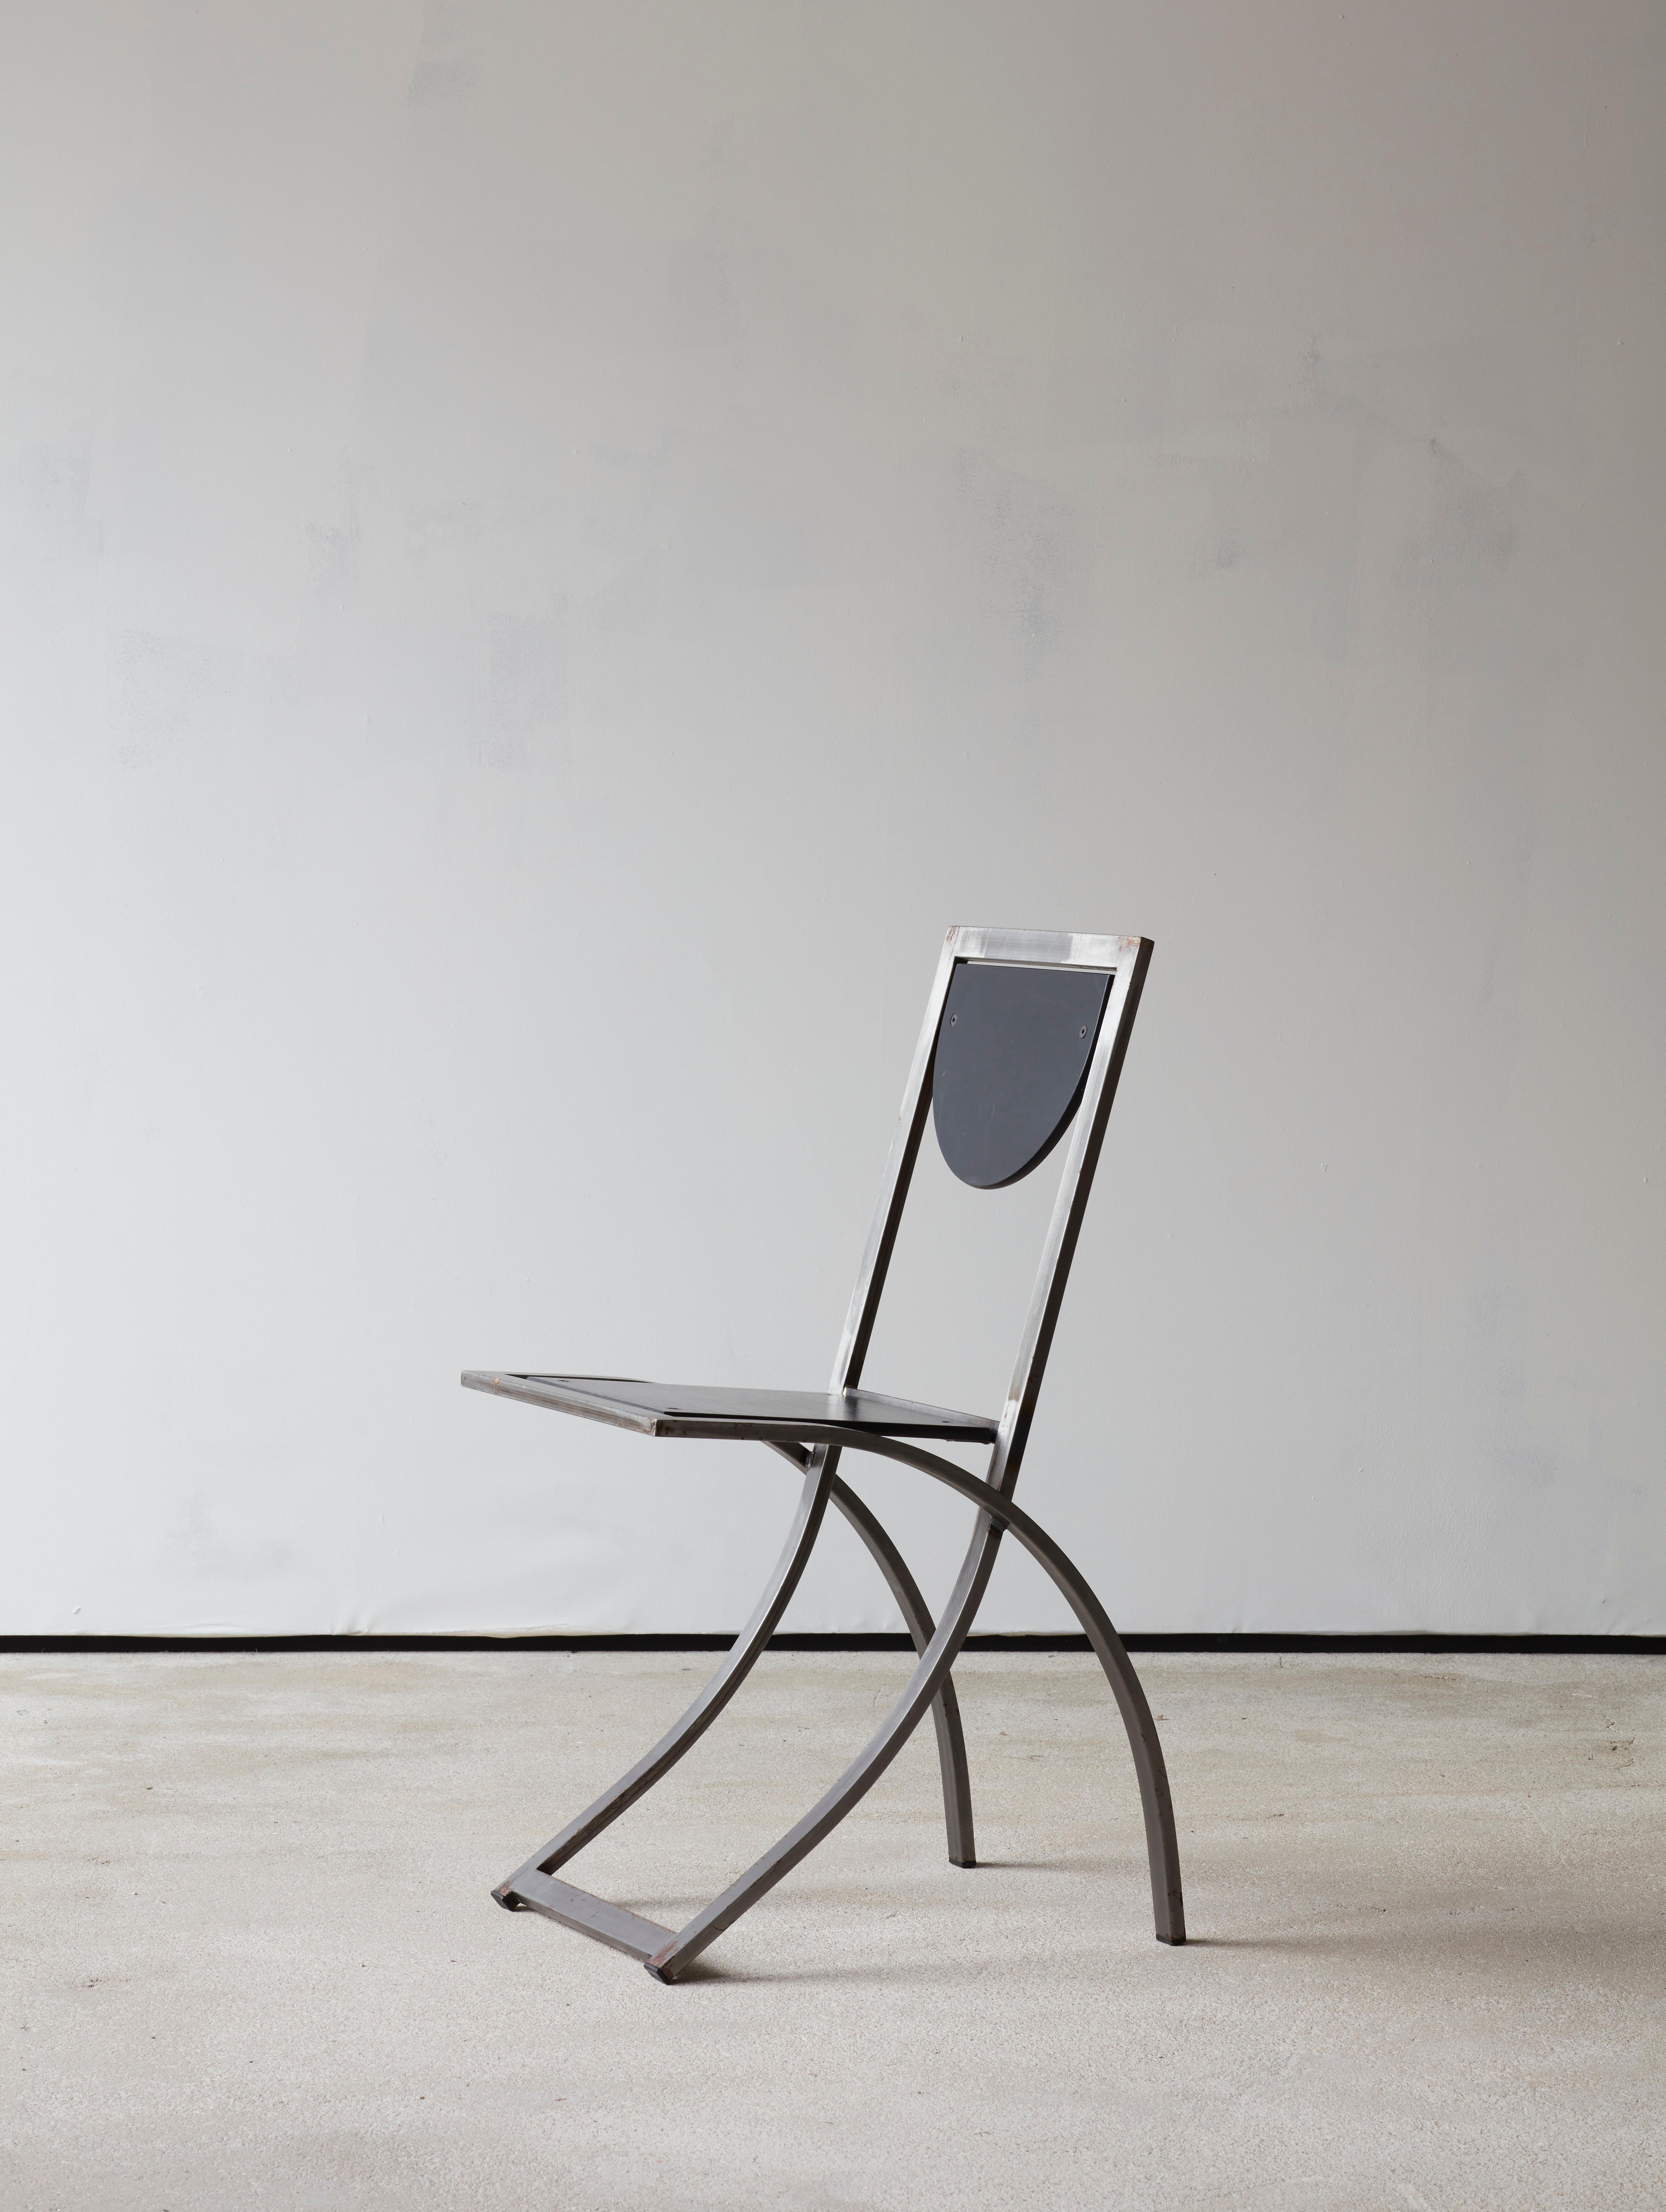 The Sinus chair is a classic of German design. 

Its flowing lines and minimal shapes, play with our notion of what a chair can be, creating a timeless piece.

The chair is formed from a forged steel frame which follows sinuous lines combined with